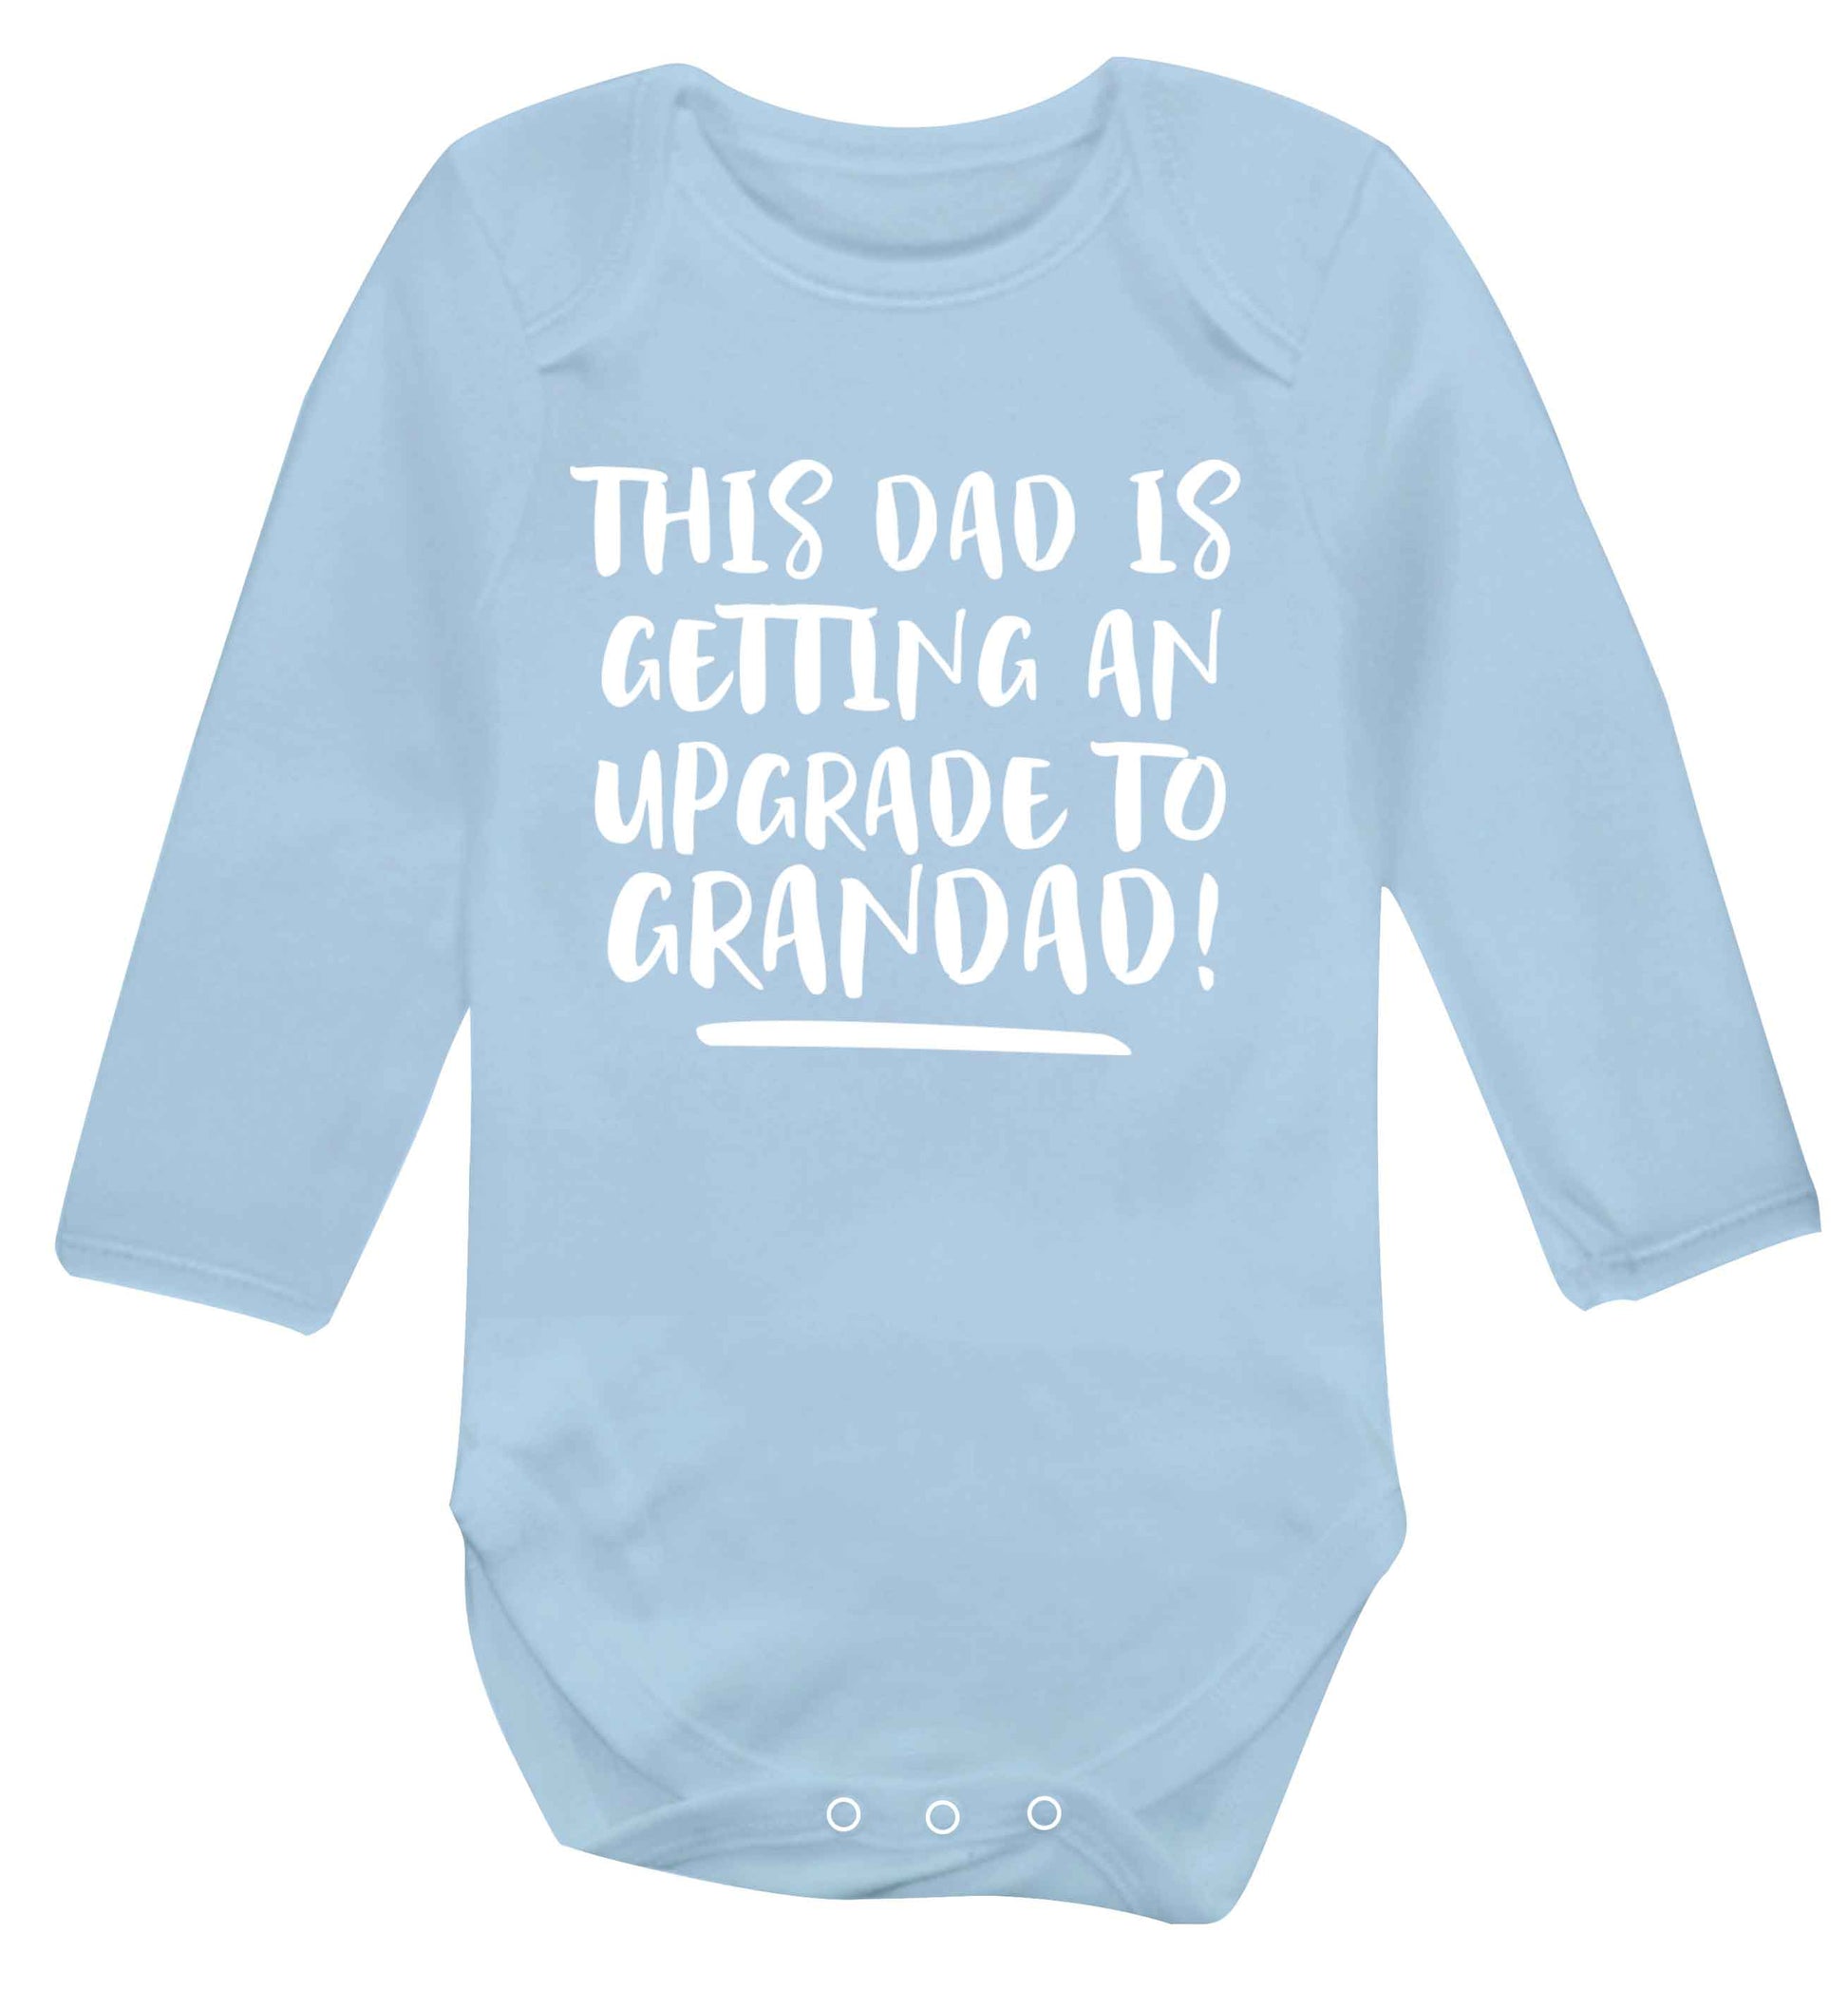 This dad is getting an upgrade to grandad! Baby Vest long sleeved pale blue 6-12 months